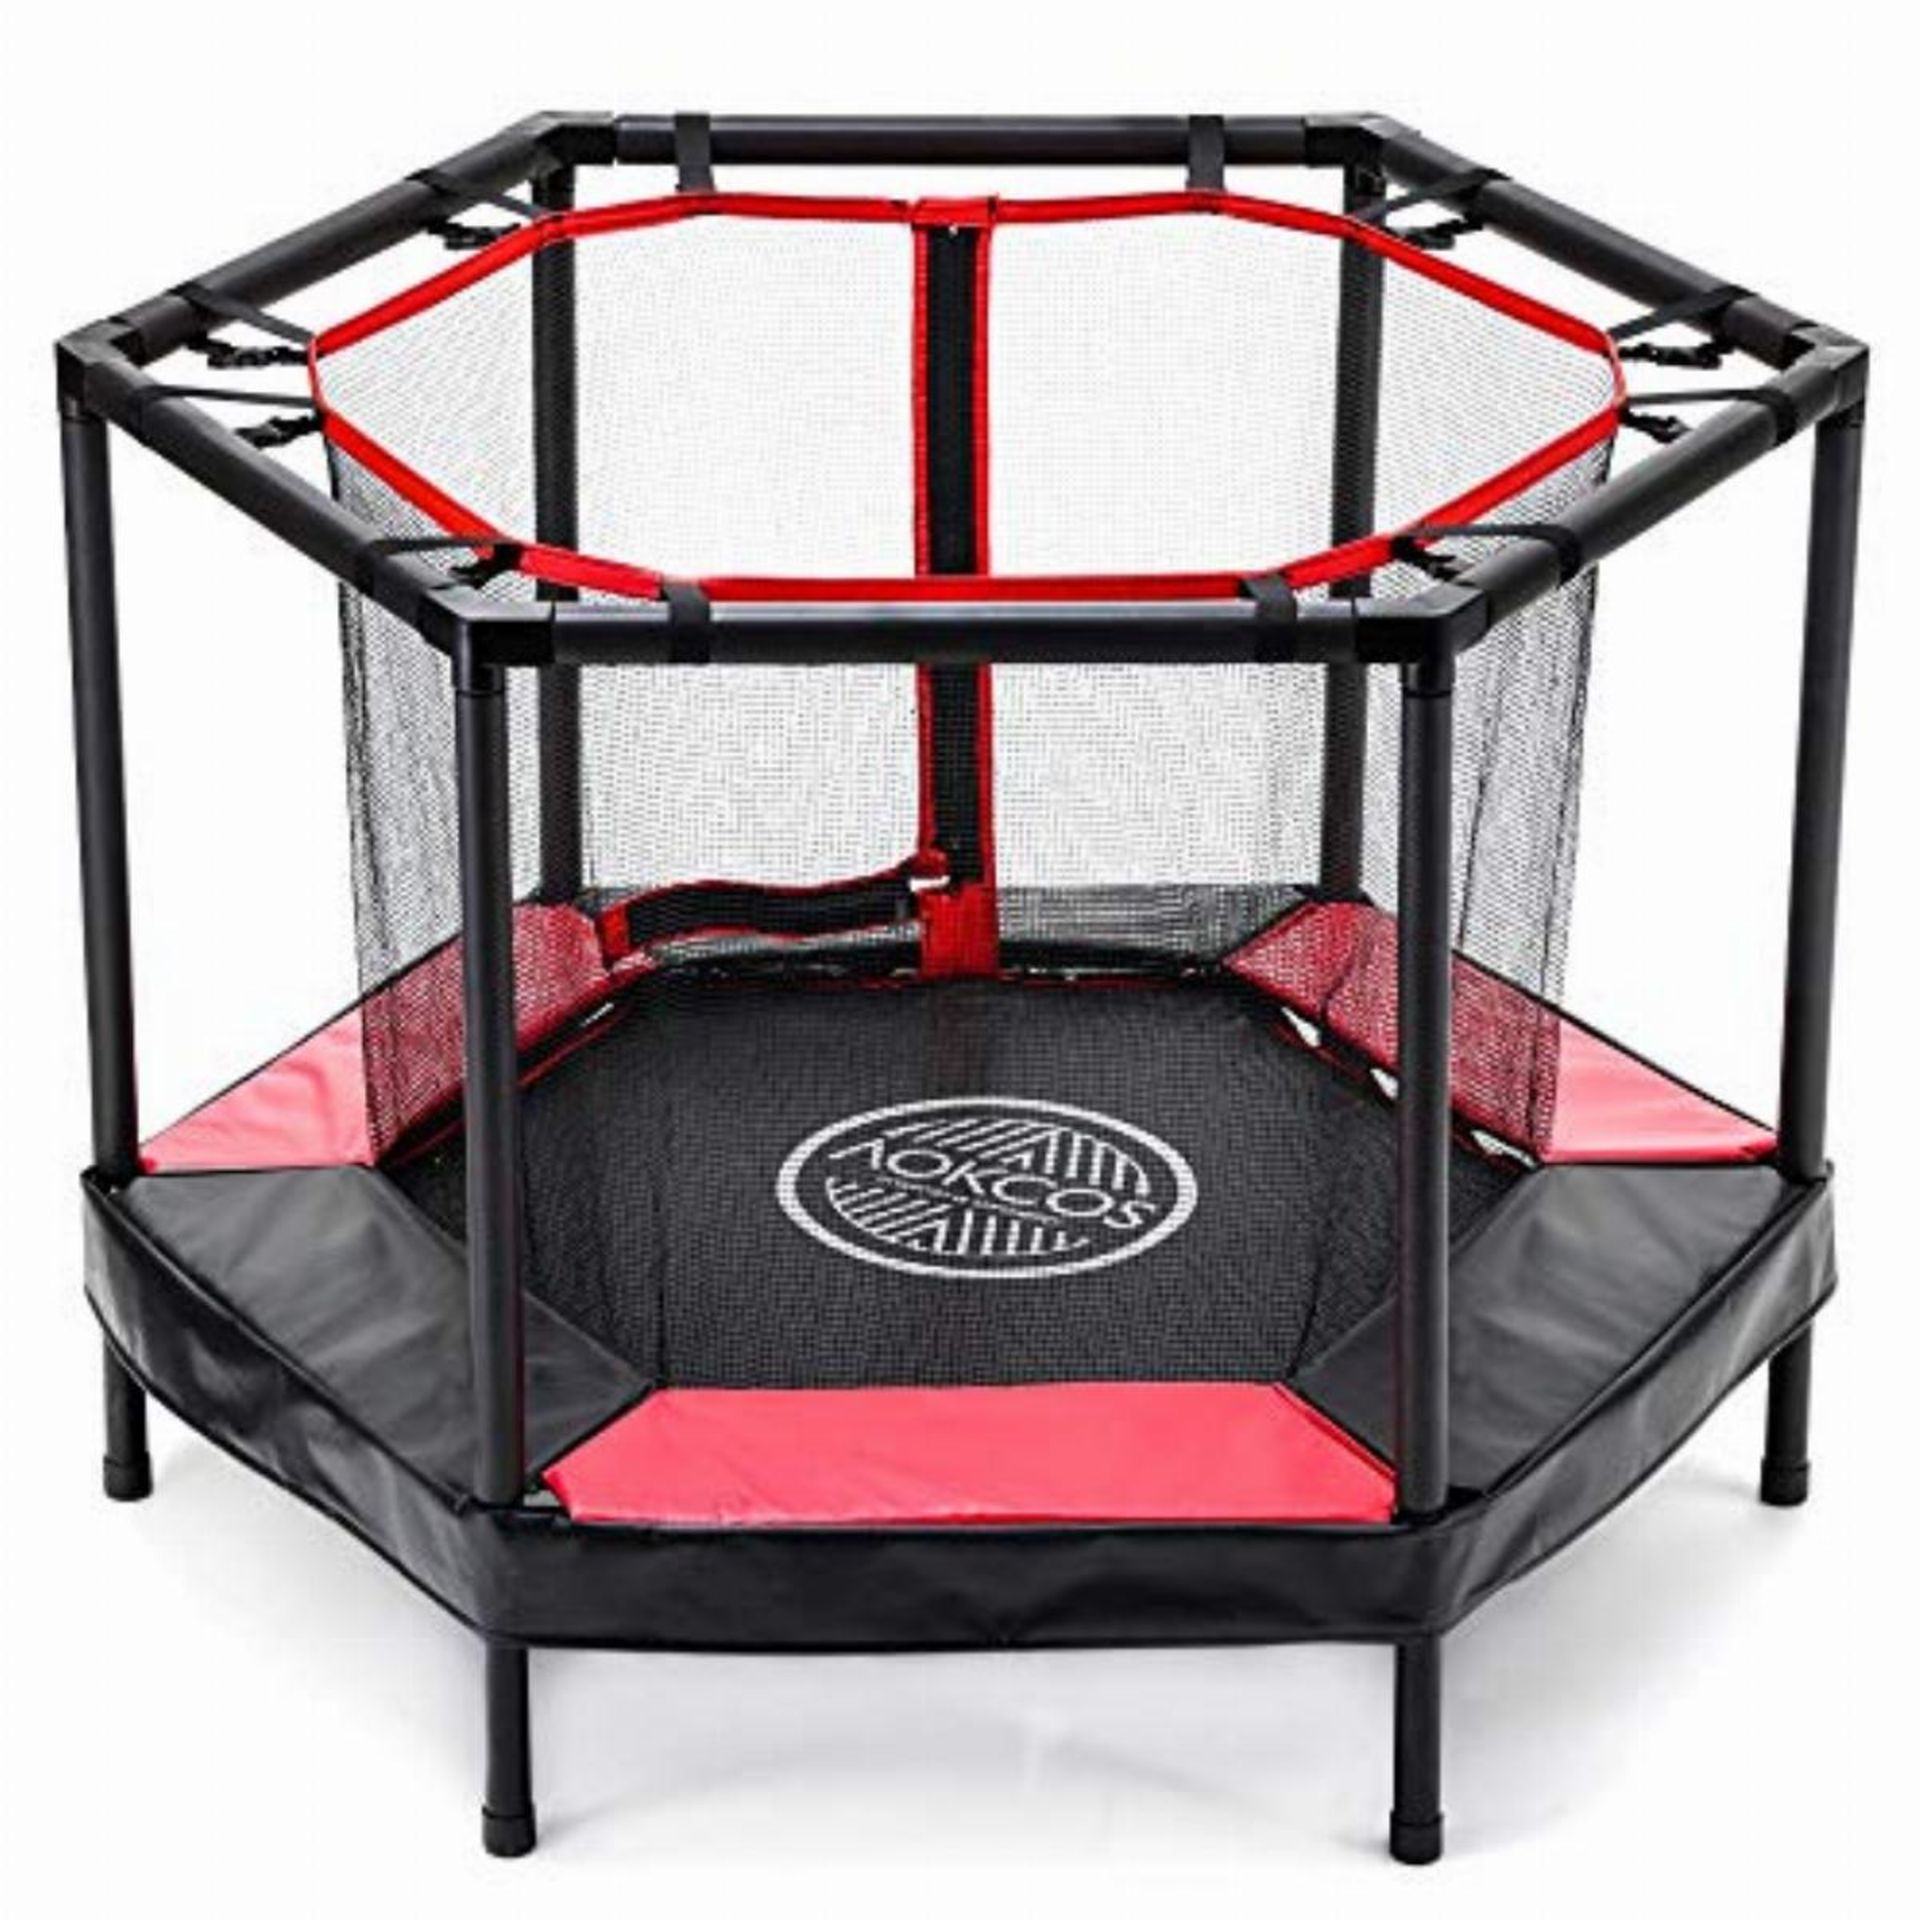 Brand new Kids Trampoline 4Ft Mini Trampolines with Enclosure Net and Safety Pad - Small Toddler